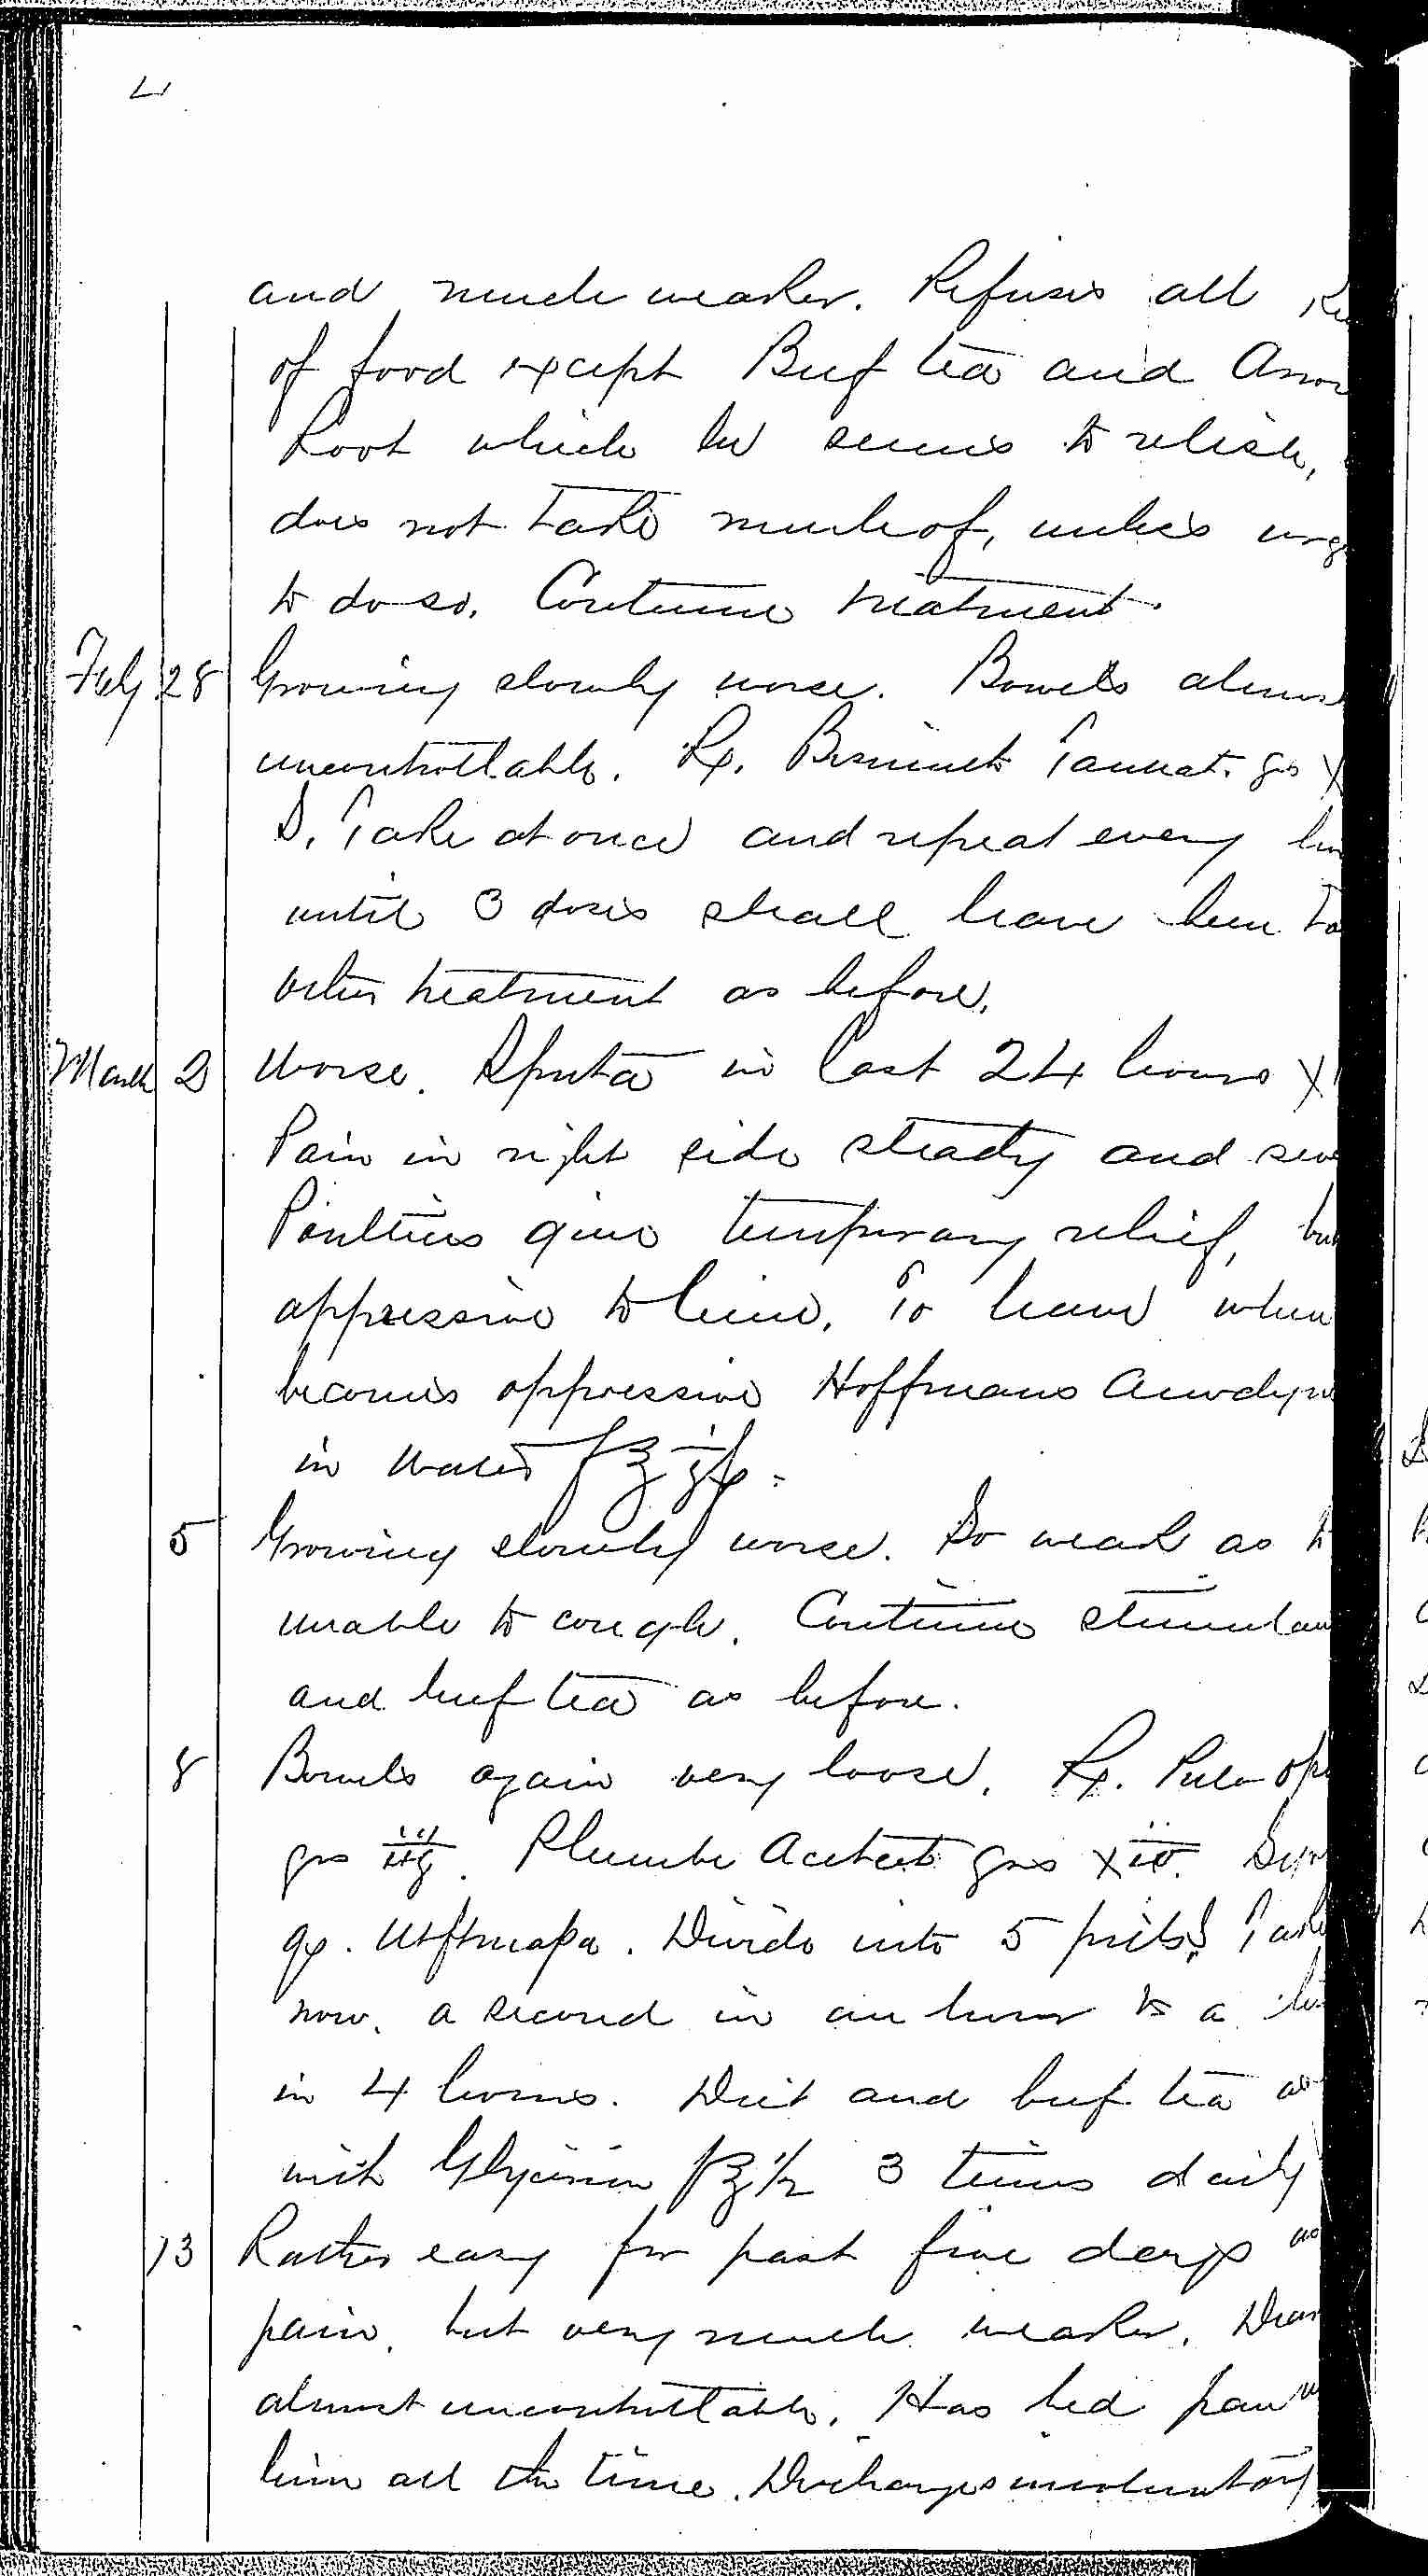 Entry for William Robertson (page 4 of 5) in the log Hospital Tickets and Case Papers - Naval Hospital - Washington, D.C. - 1868-69